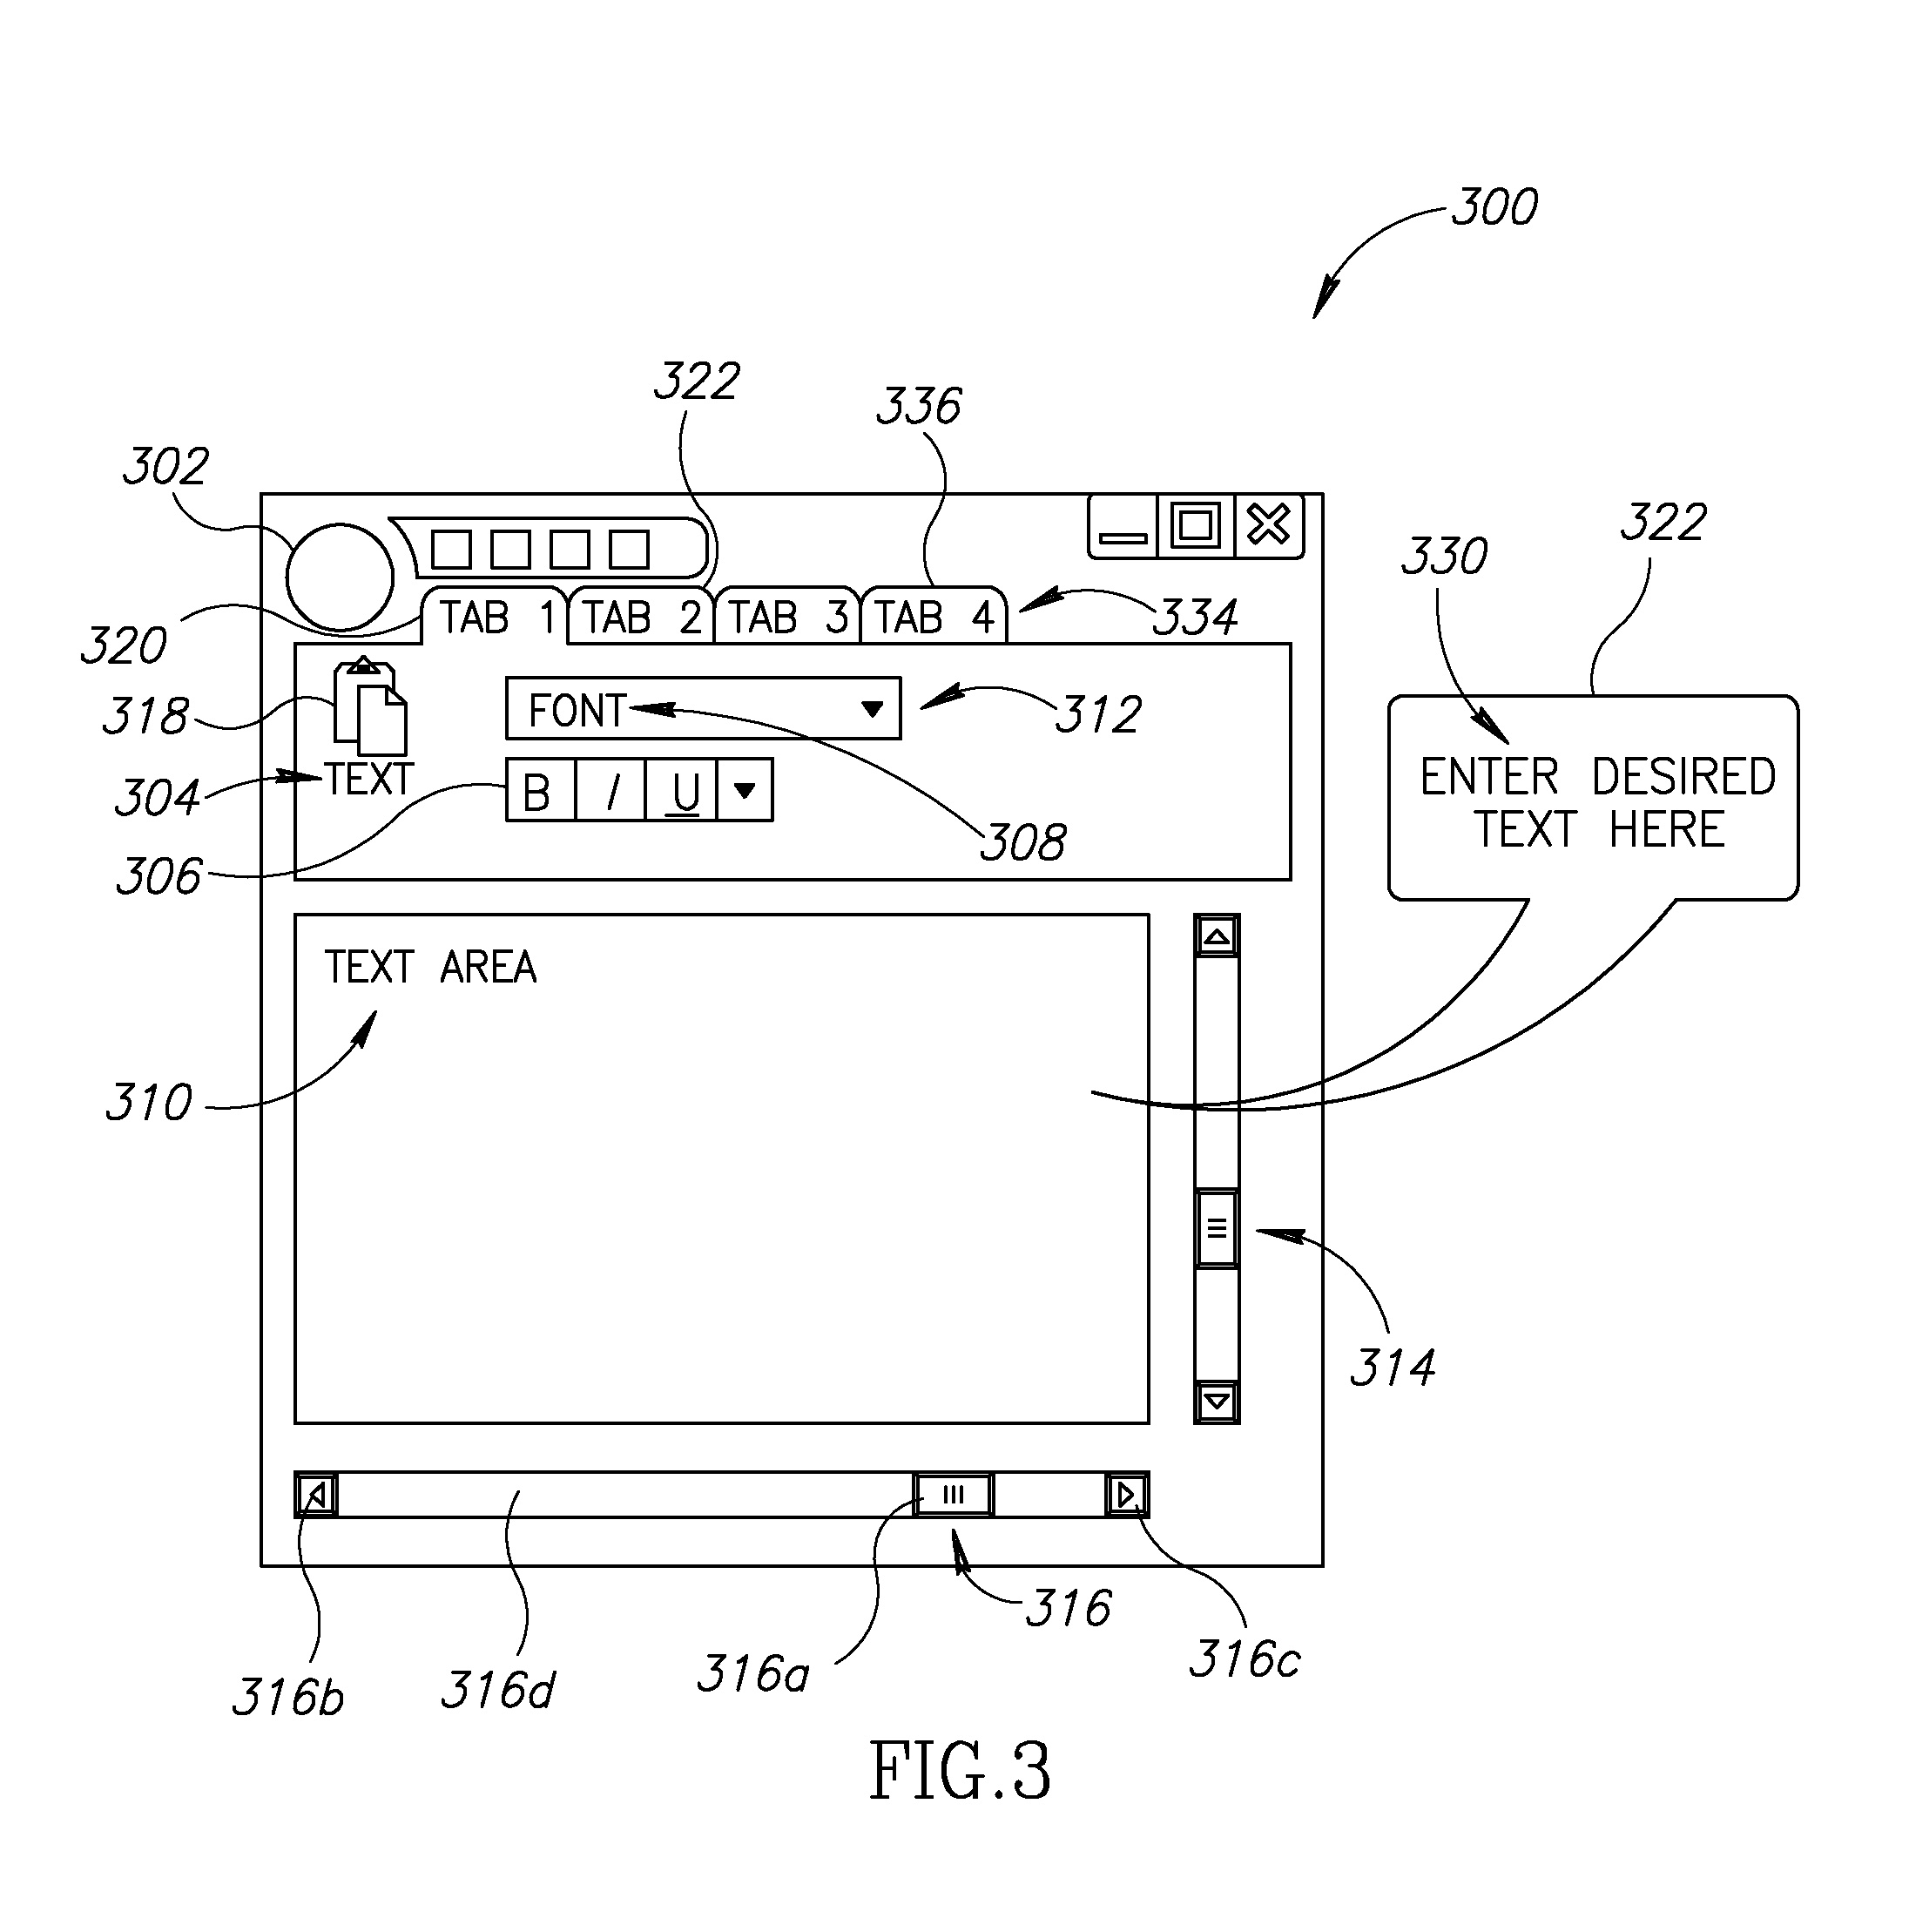 Display-independent recognition of graphical user interface control